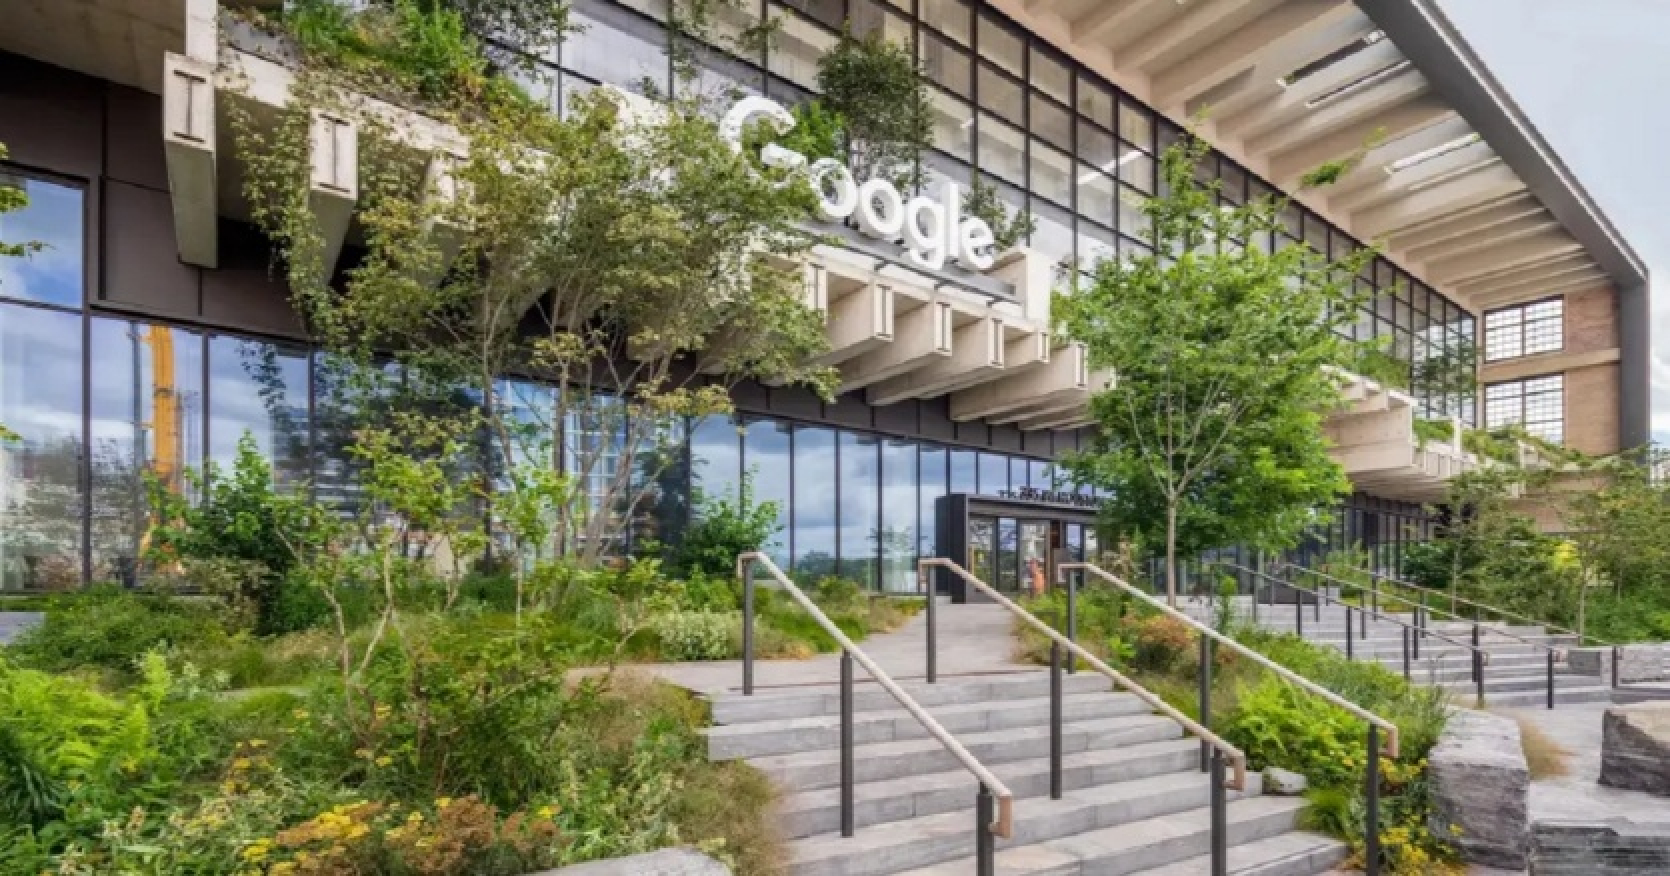 Yoga, massages and full all-inclusive: journalists visited Google's new $2.1 billion headquarters